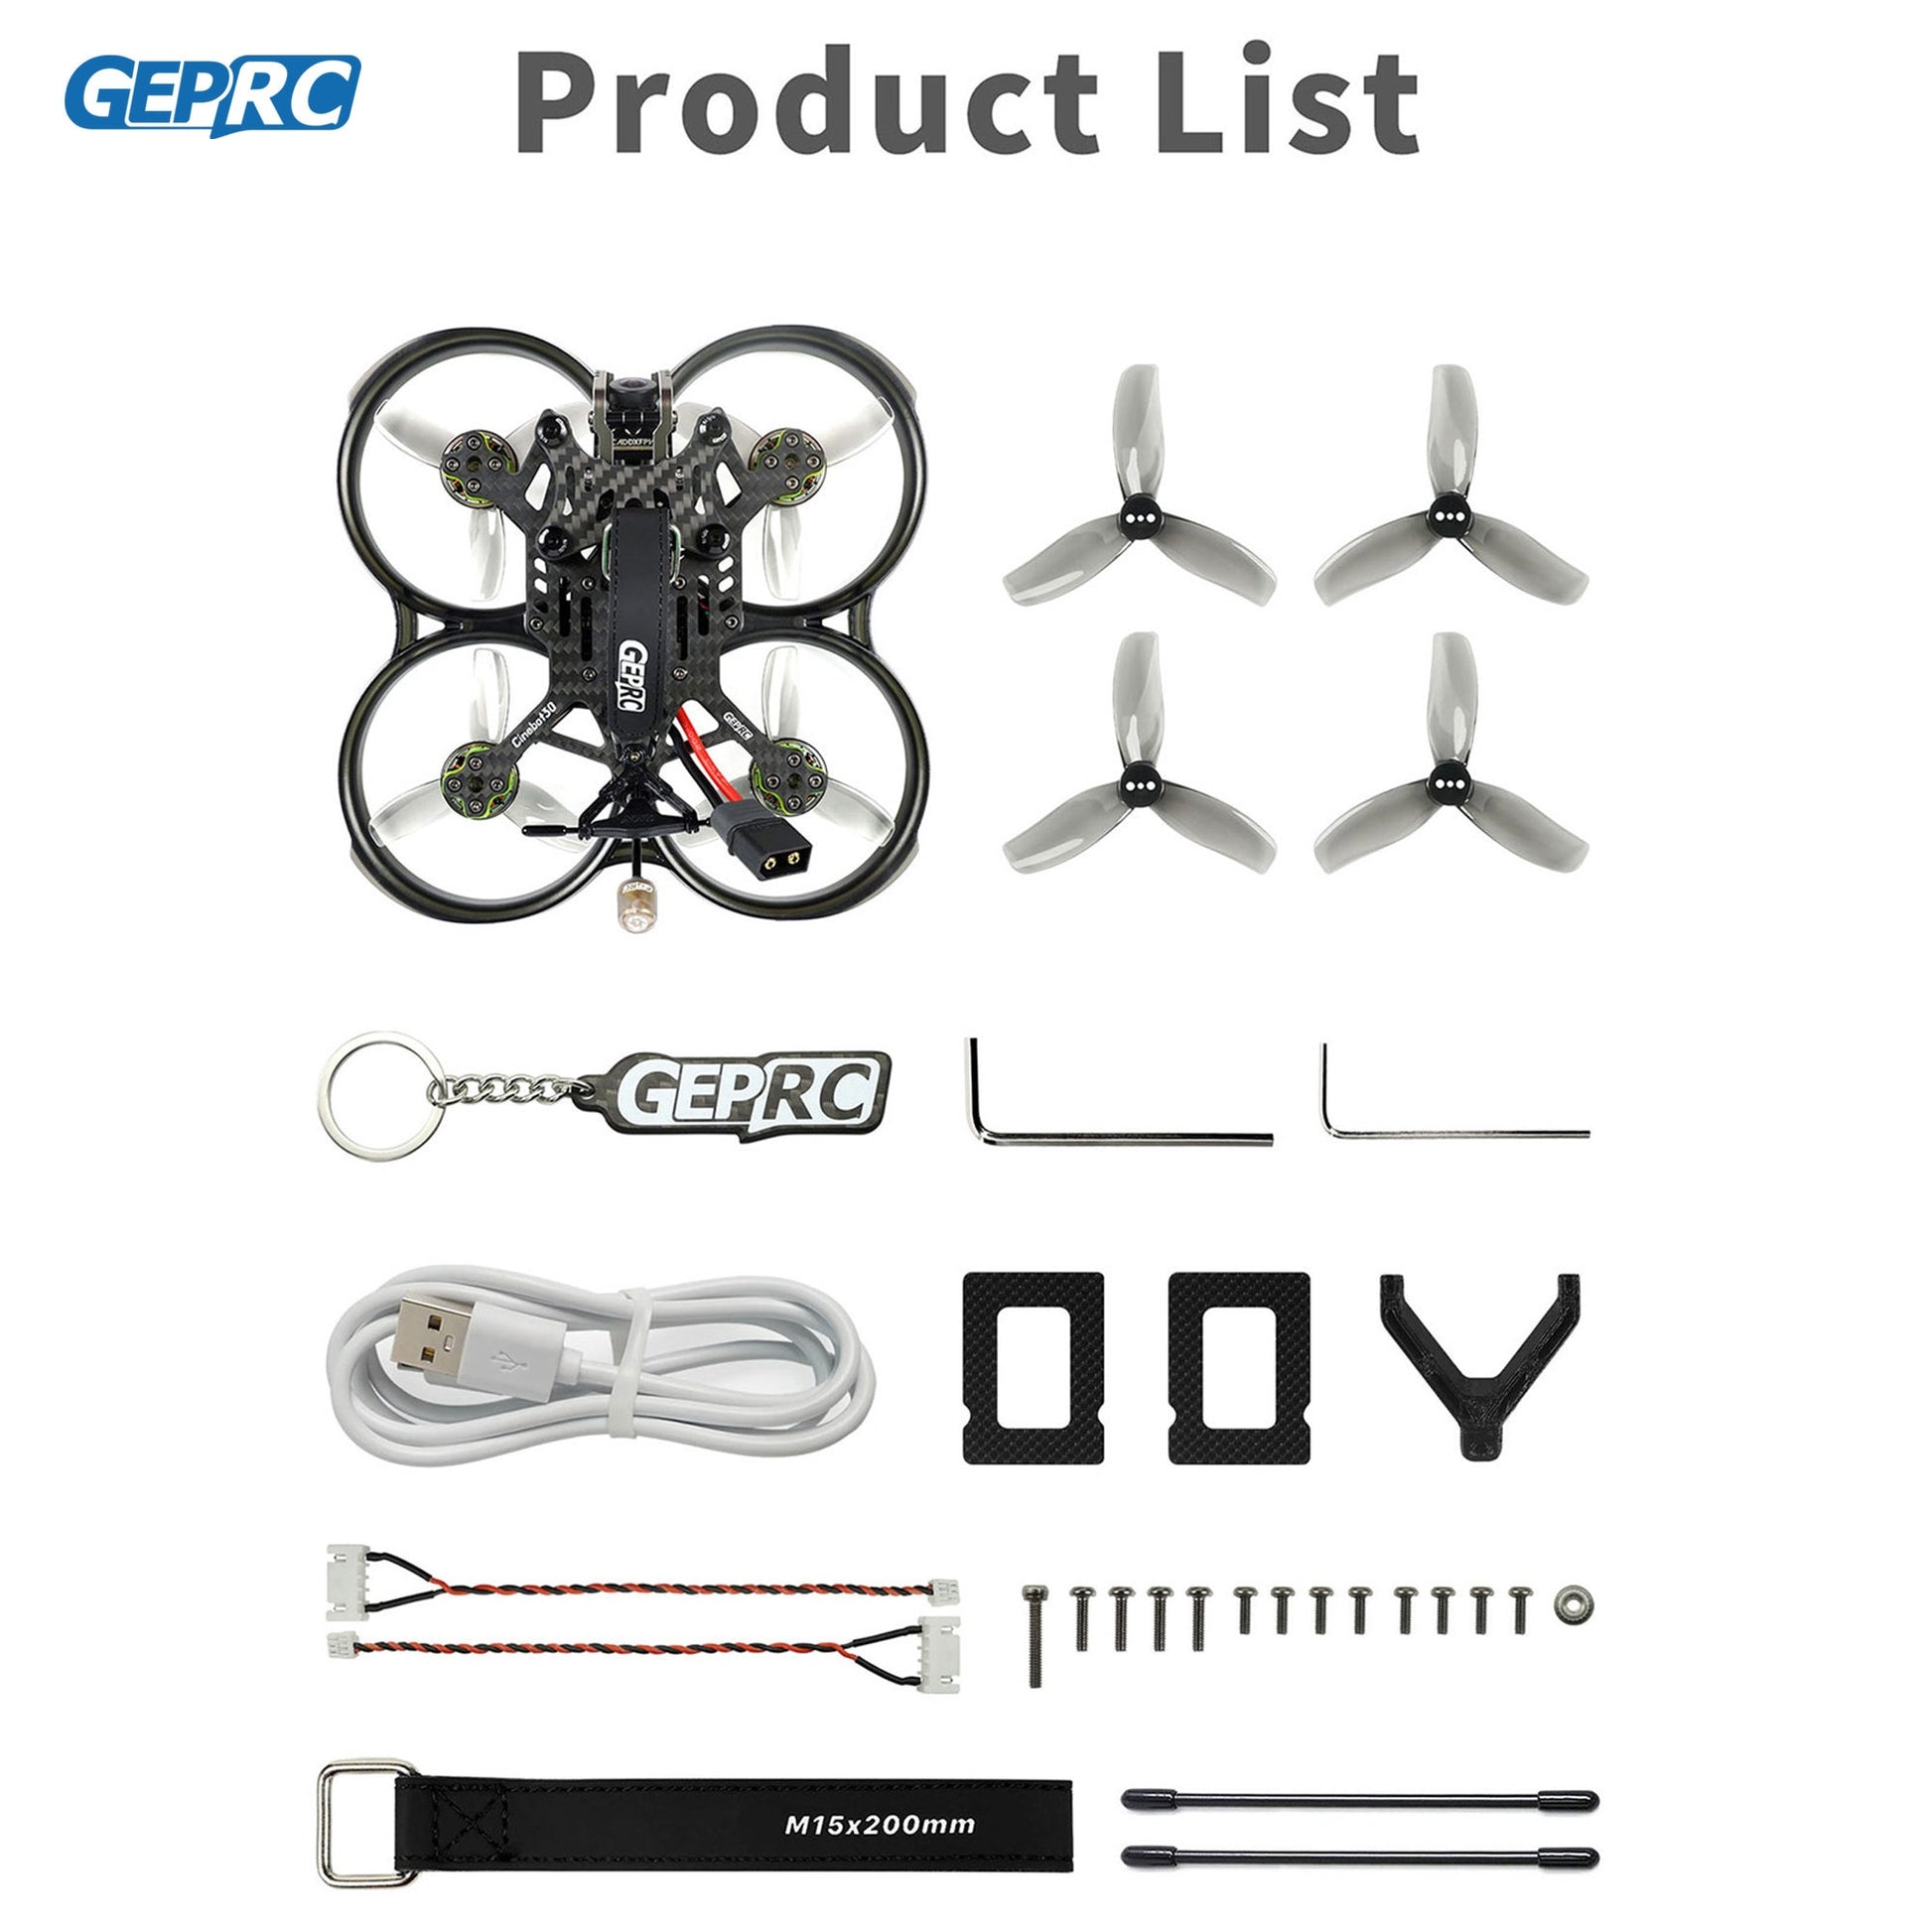 GEPRC Cinebot30 HD, GEPRC Product List 8 NAA GEPRO ( ( d0y Tt